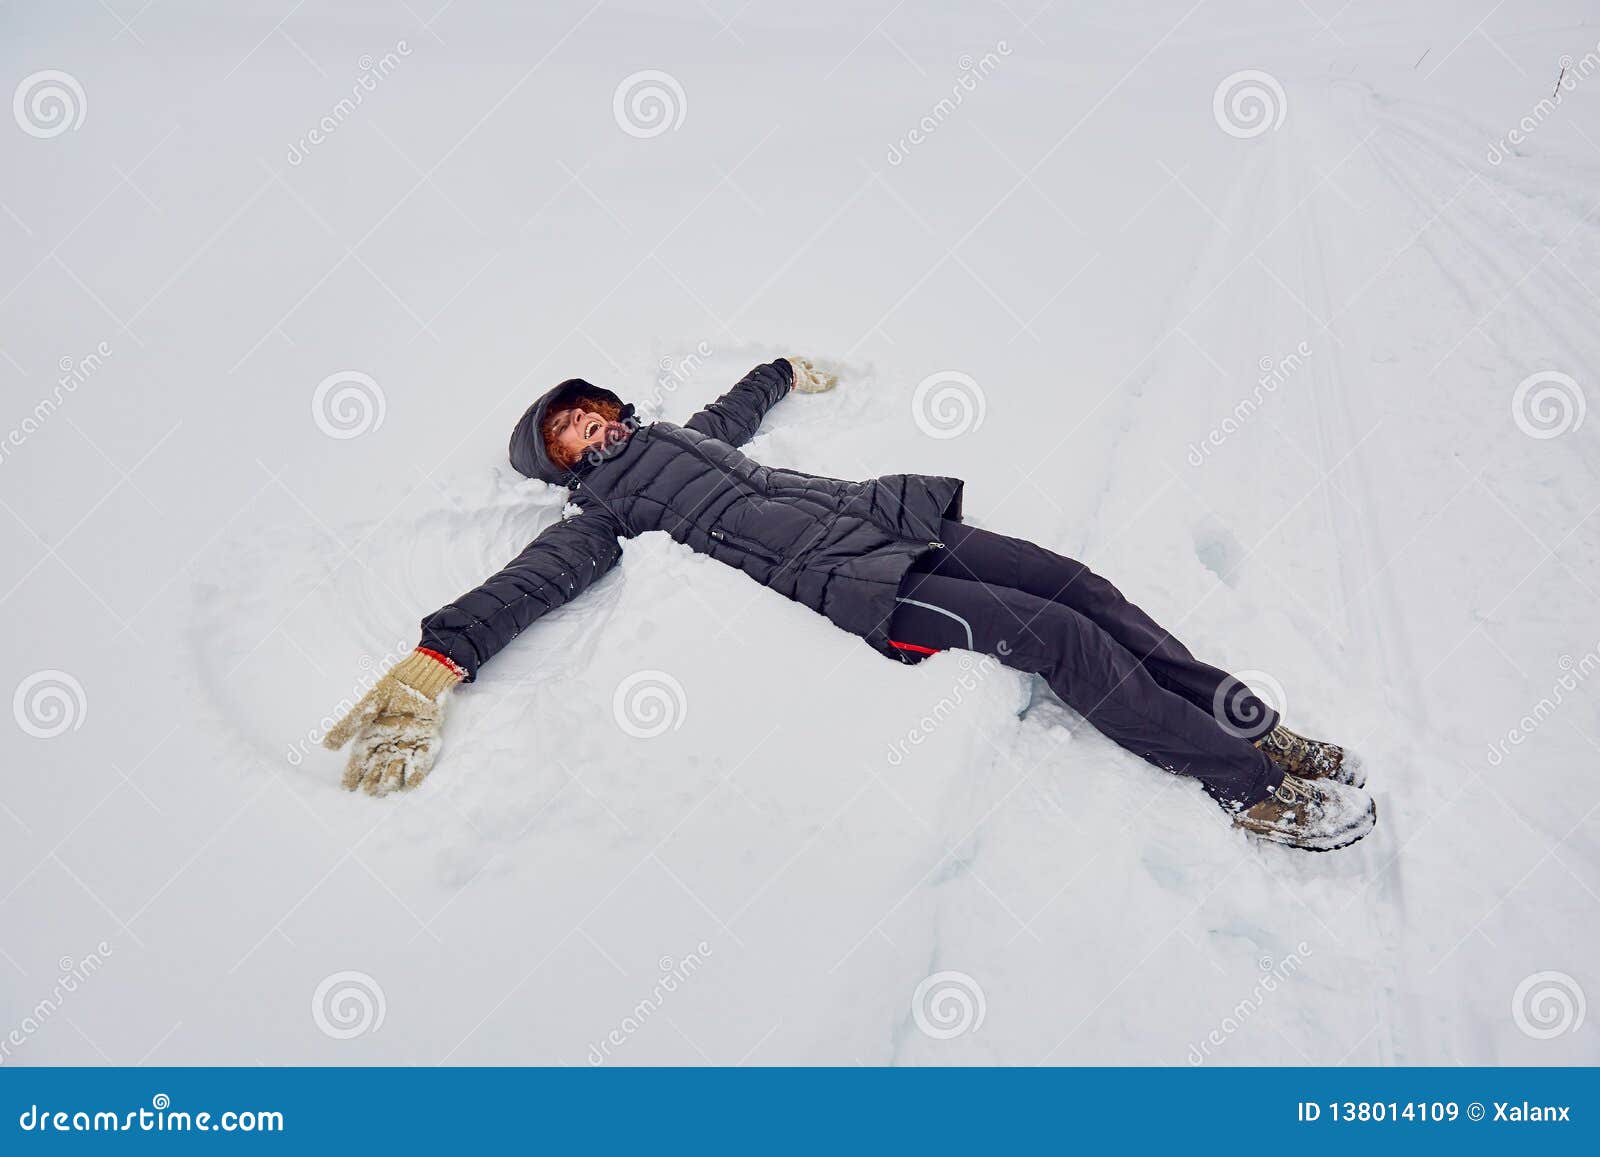 Woman Making Snow Angels Stock Image Image Of Play 138014109